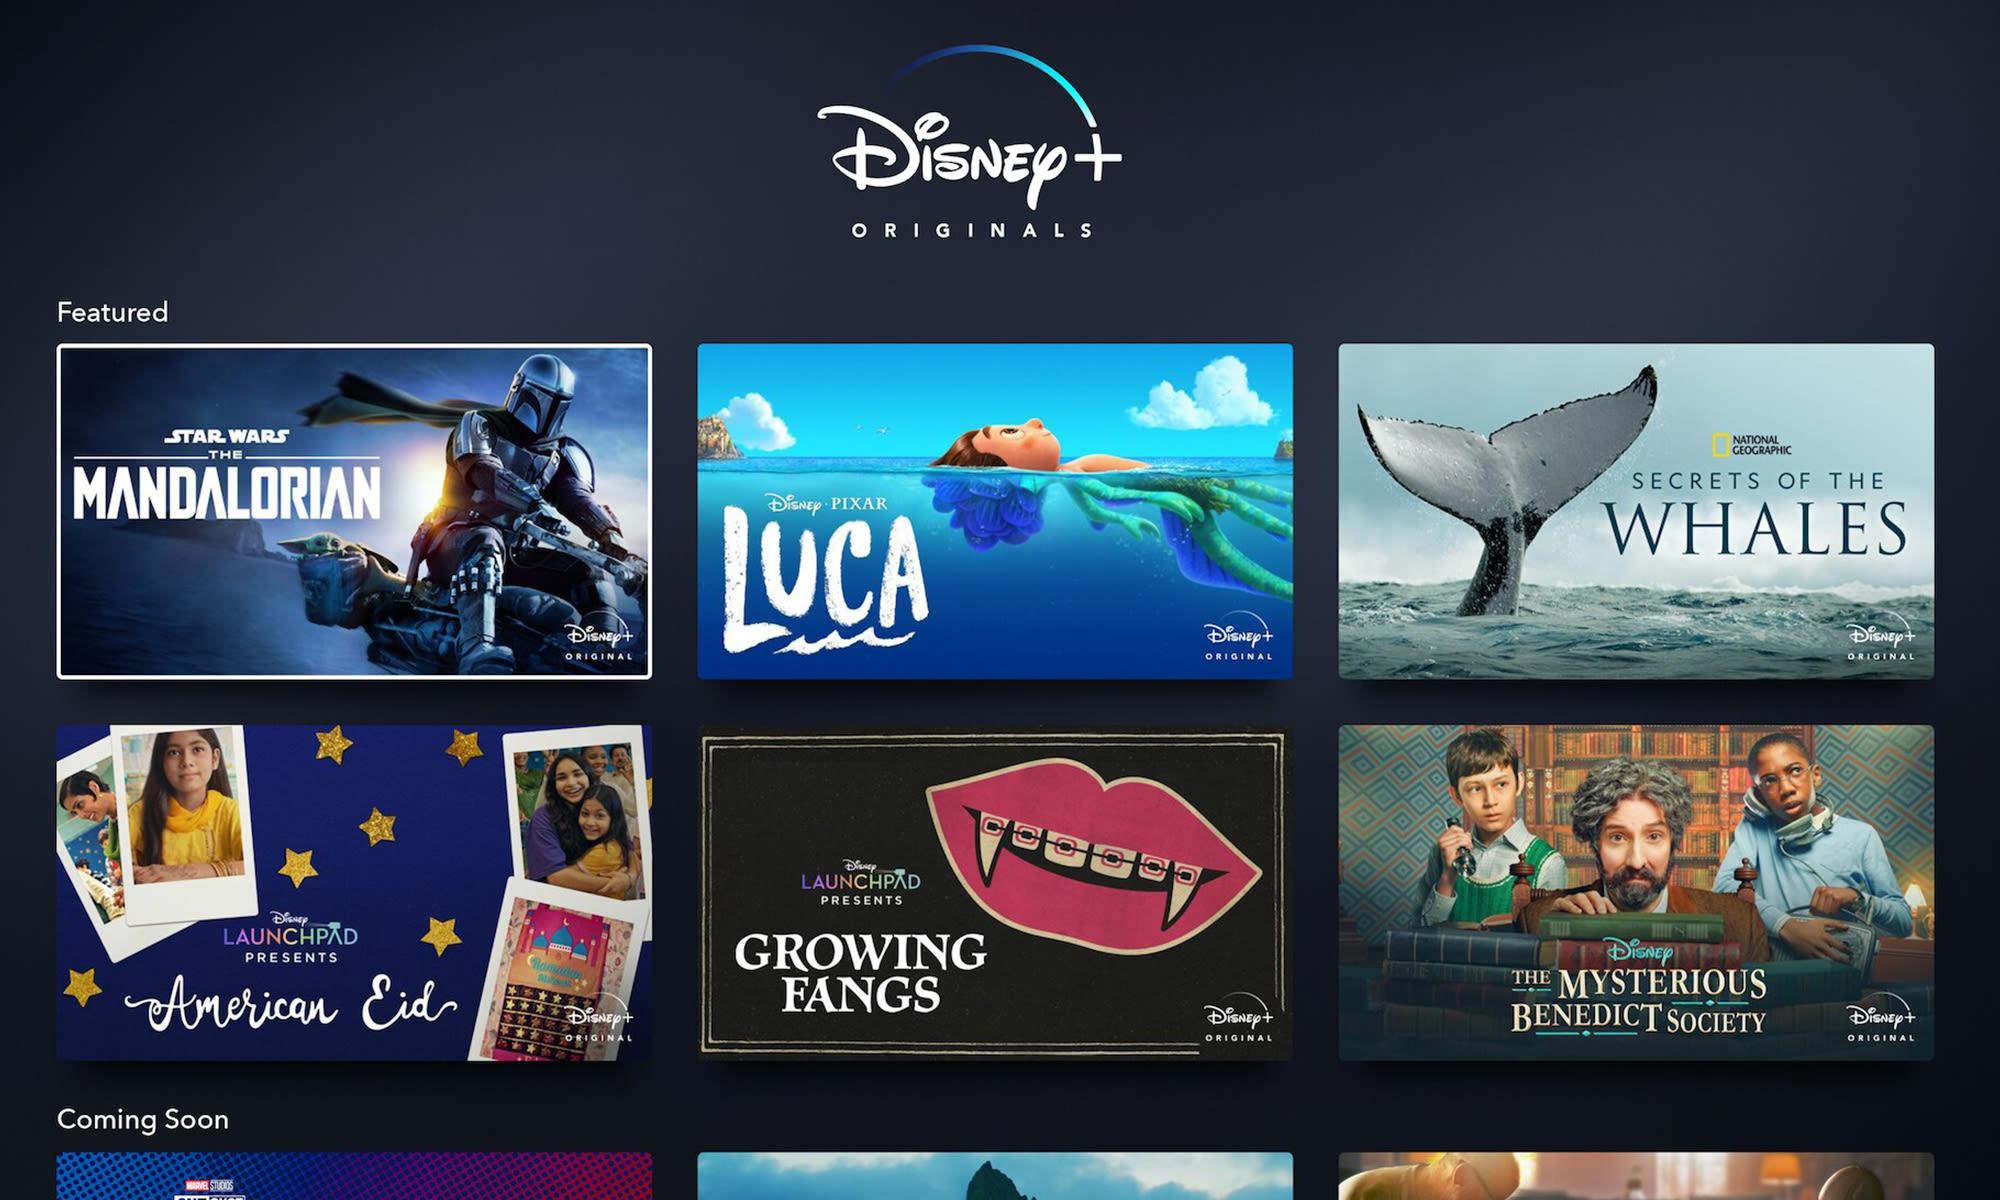 Disney's Streaming Business Is Finally Profitable. So Why Is the Stock Down?